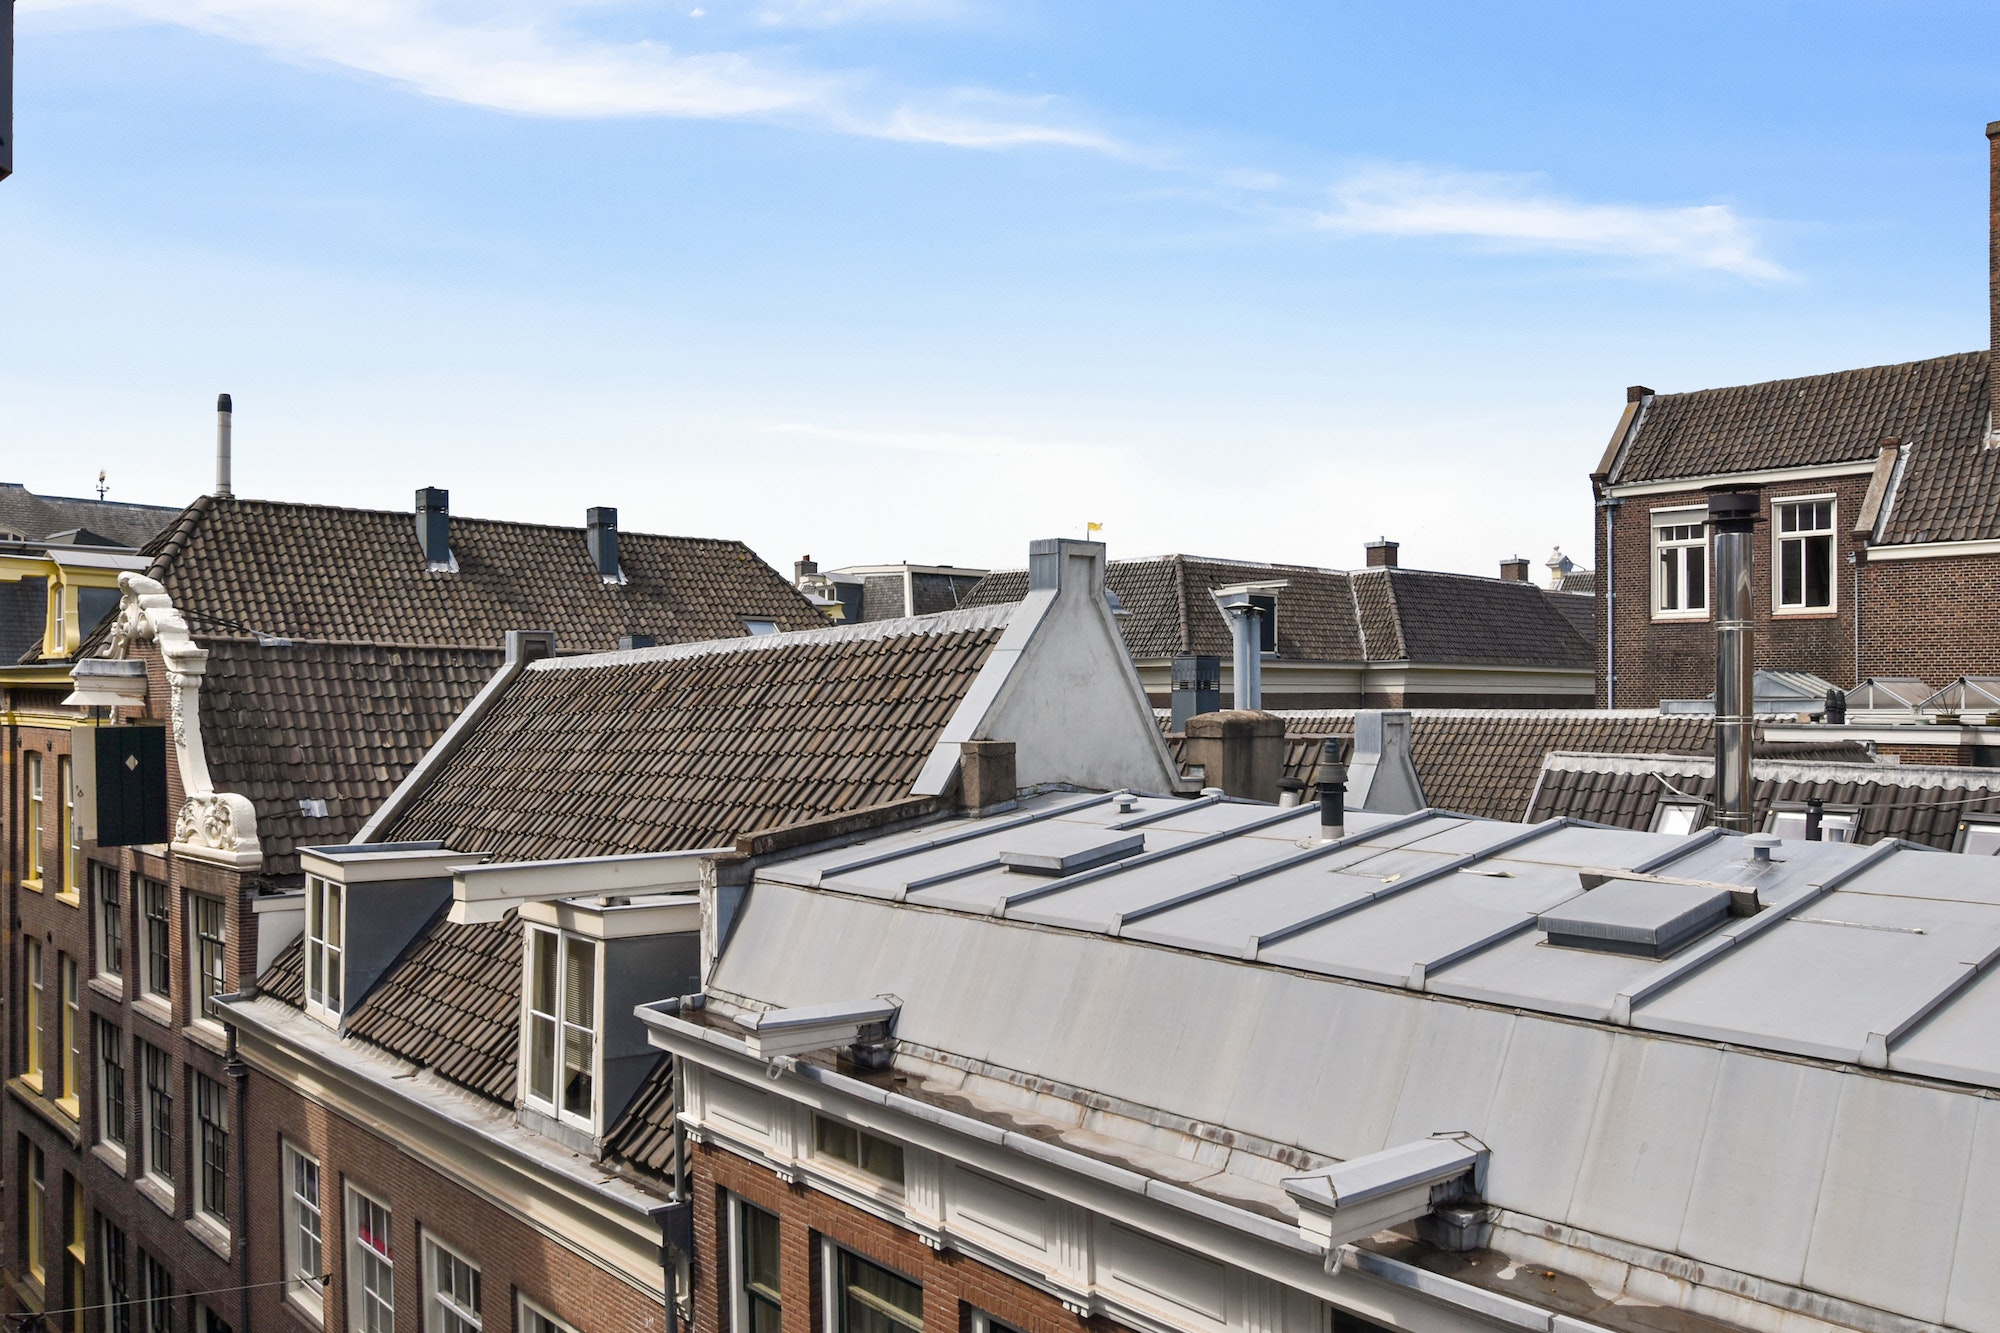 Roofs of European houses